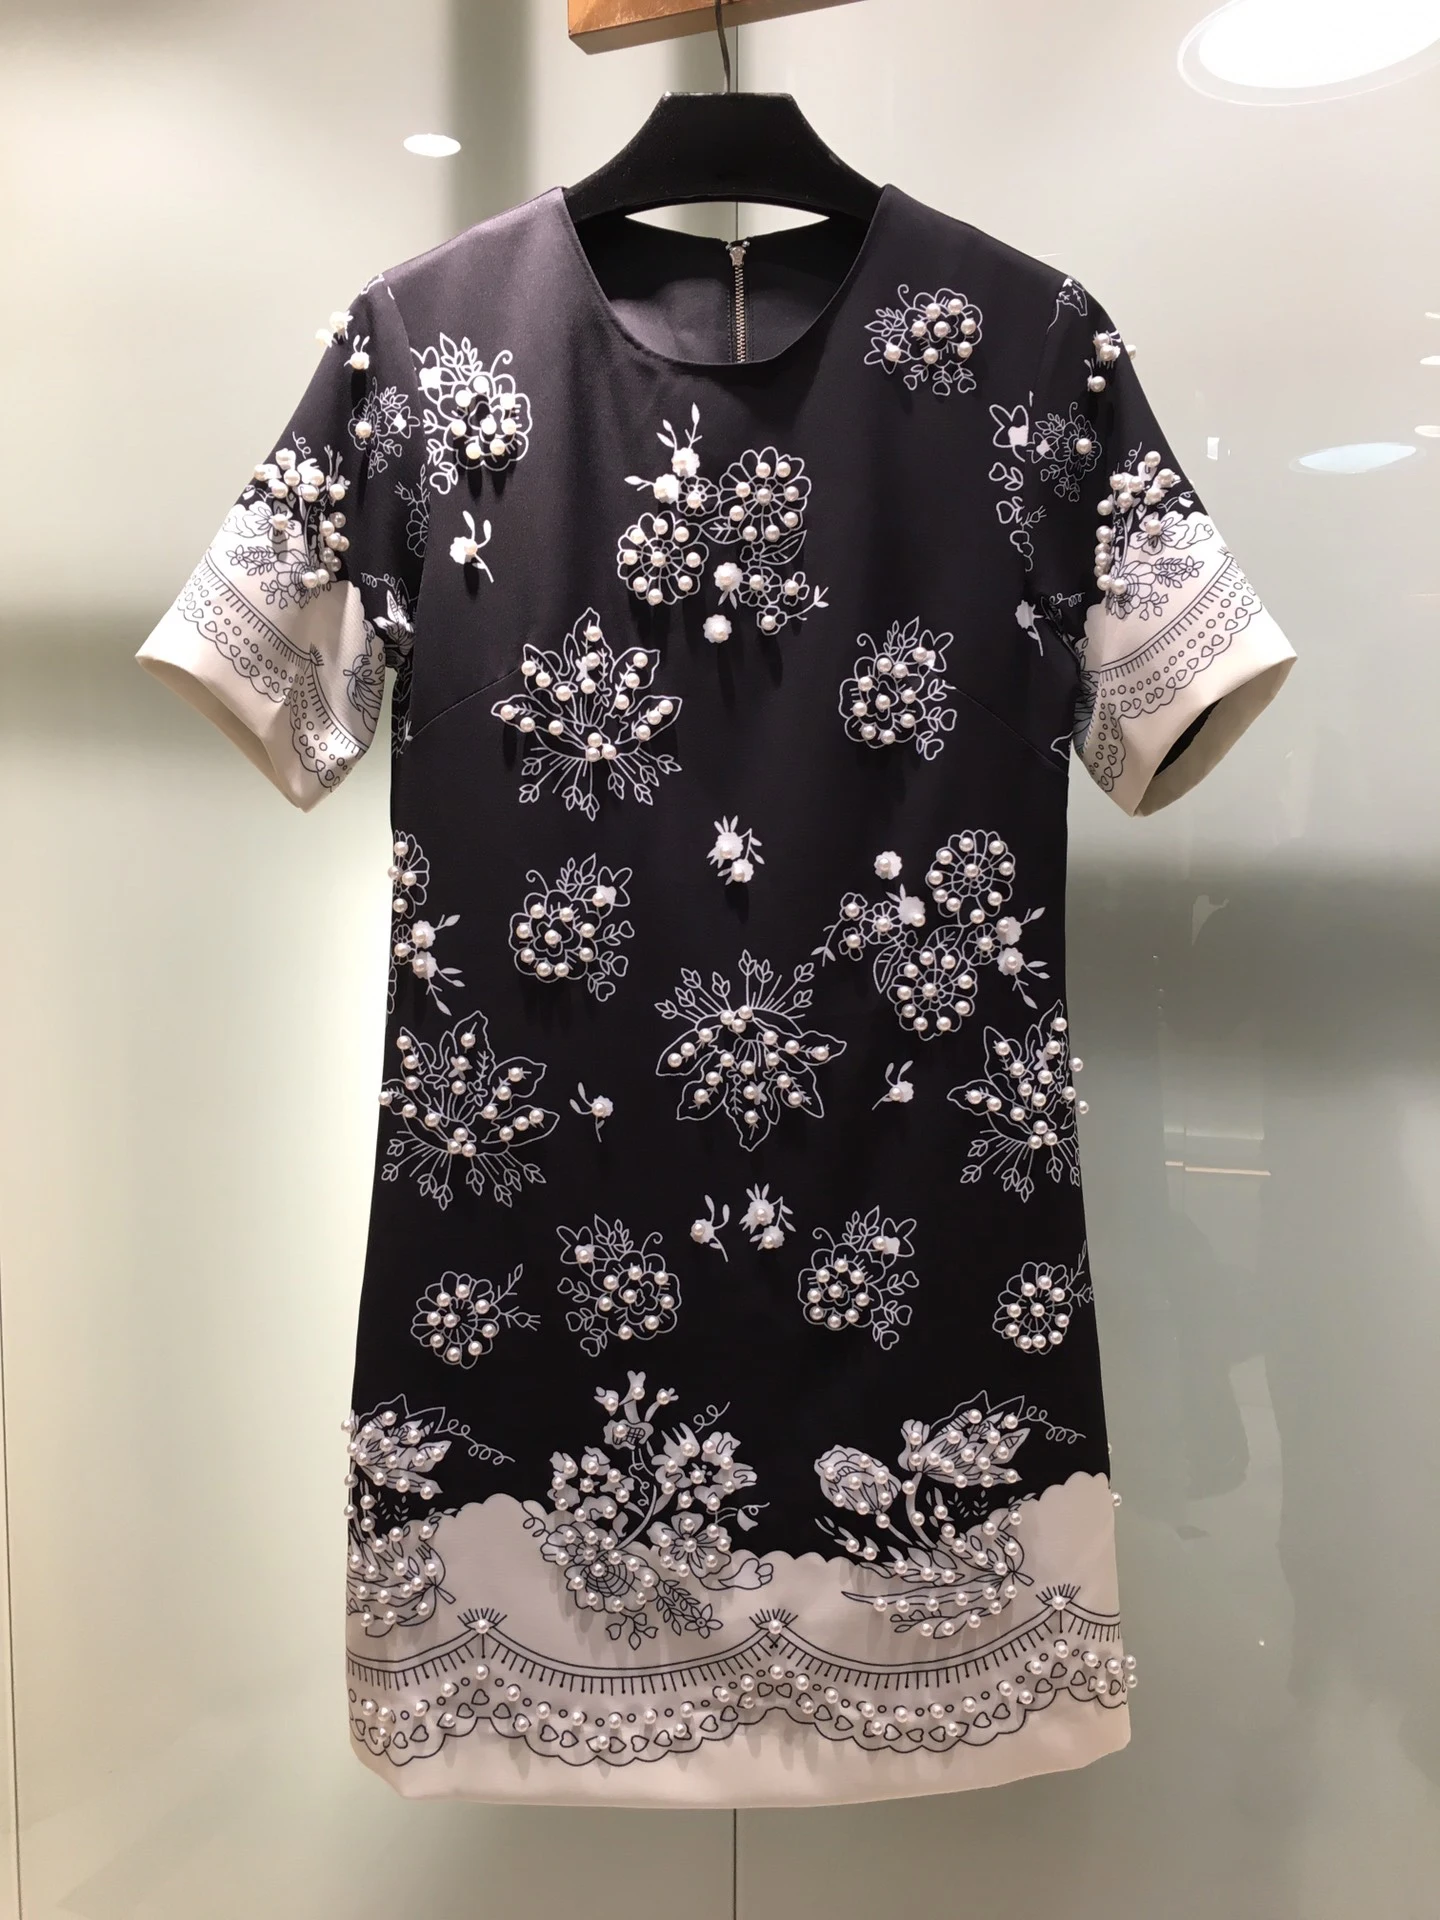 Spring new fashion Week debut new heavy industry knitted embellished floral print dress dress upper body slimming